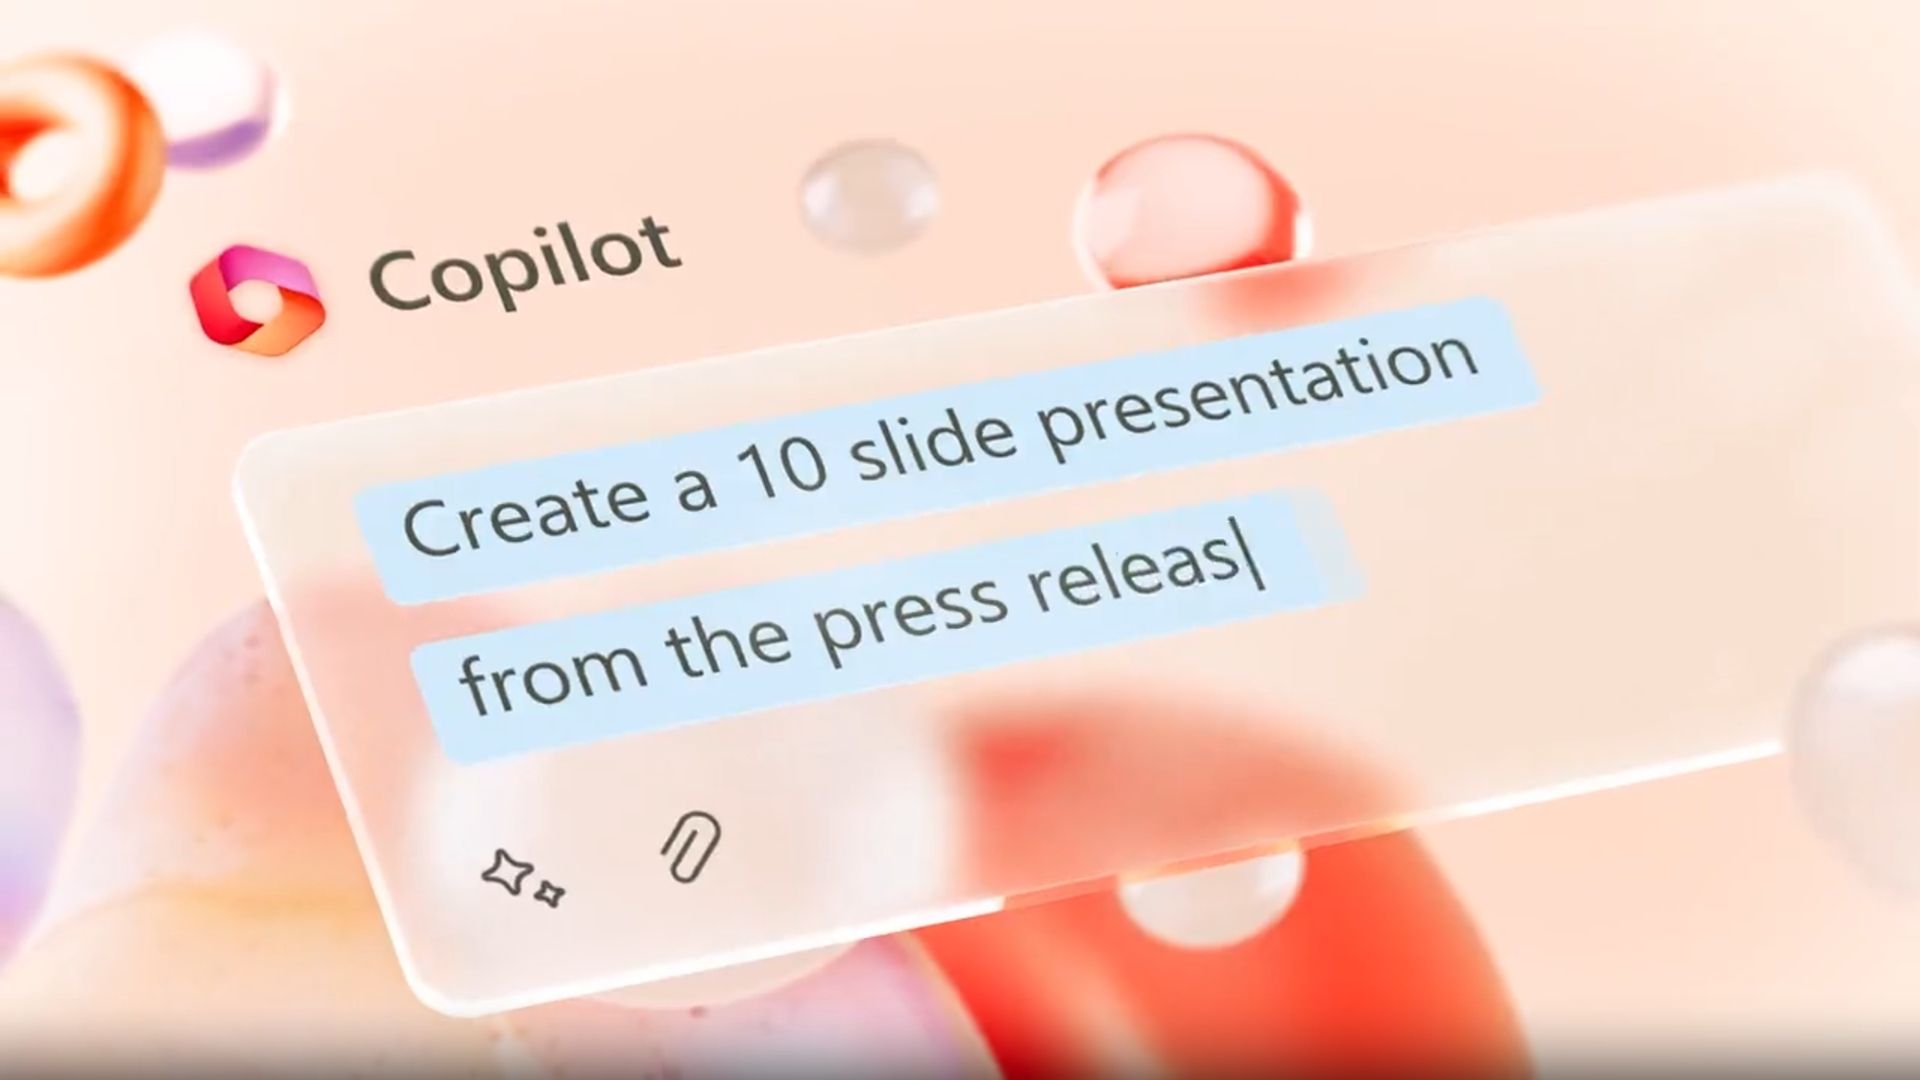 How to use Copilot in PowerPoint